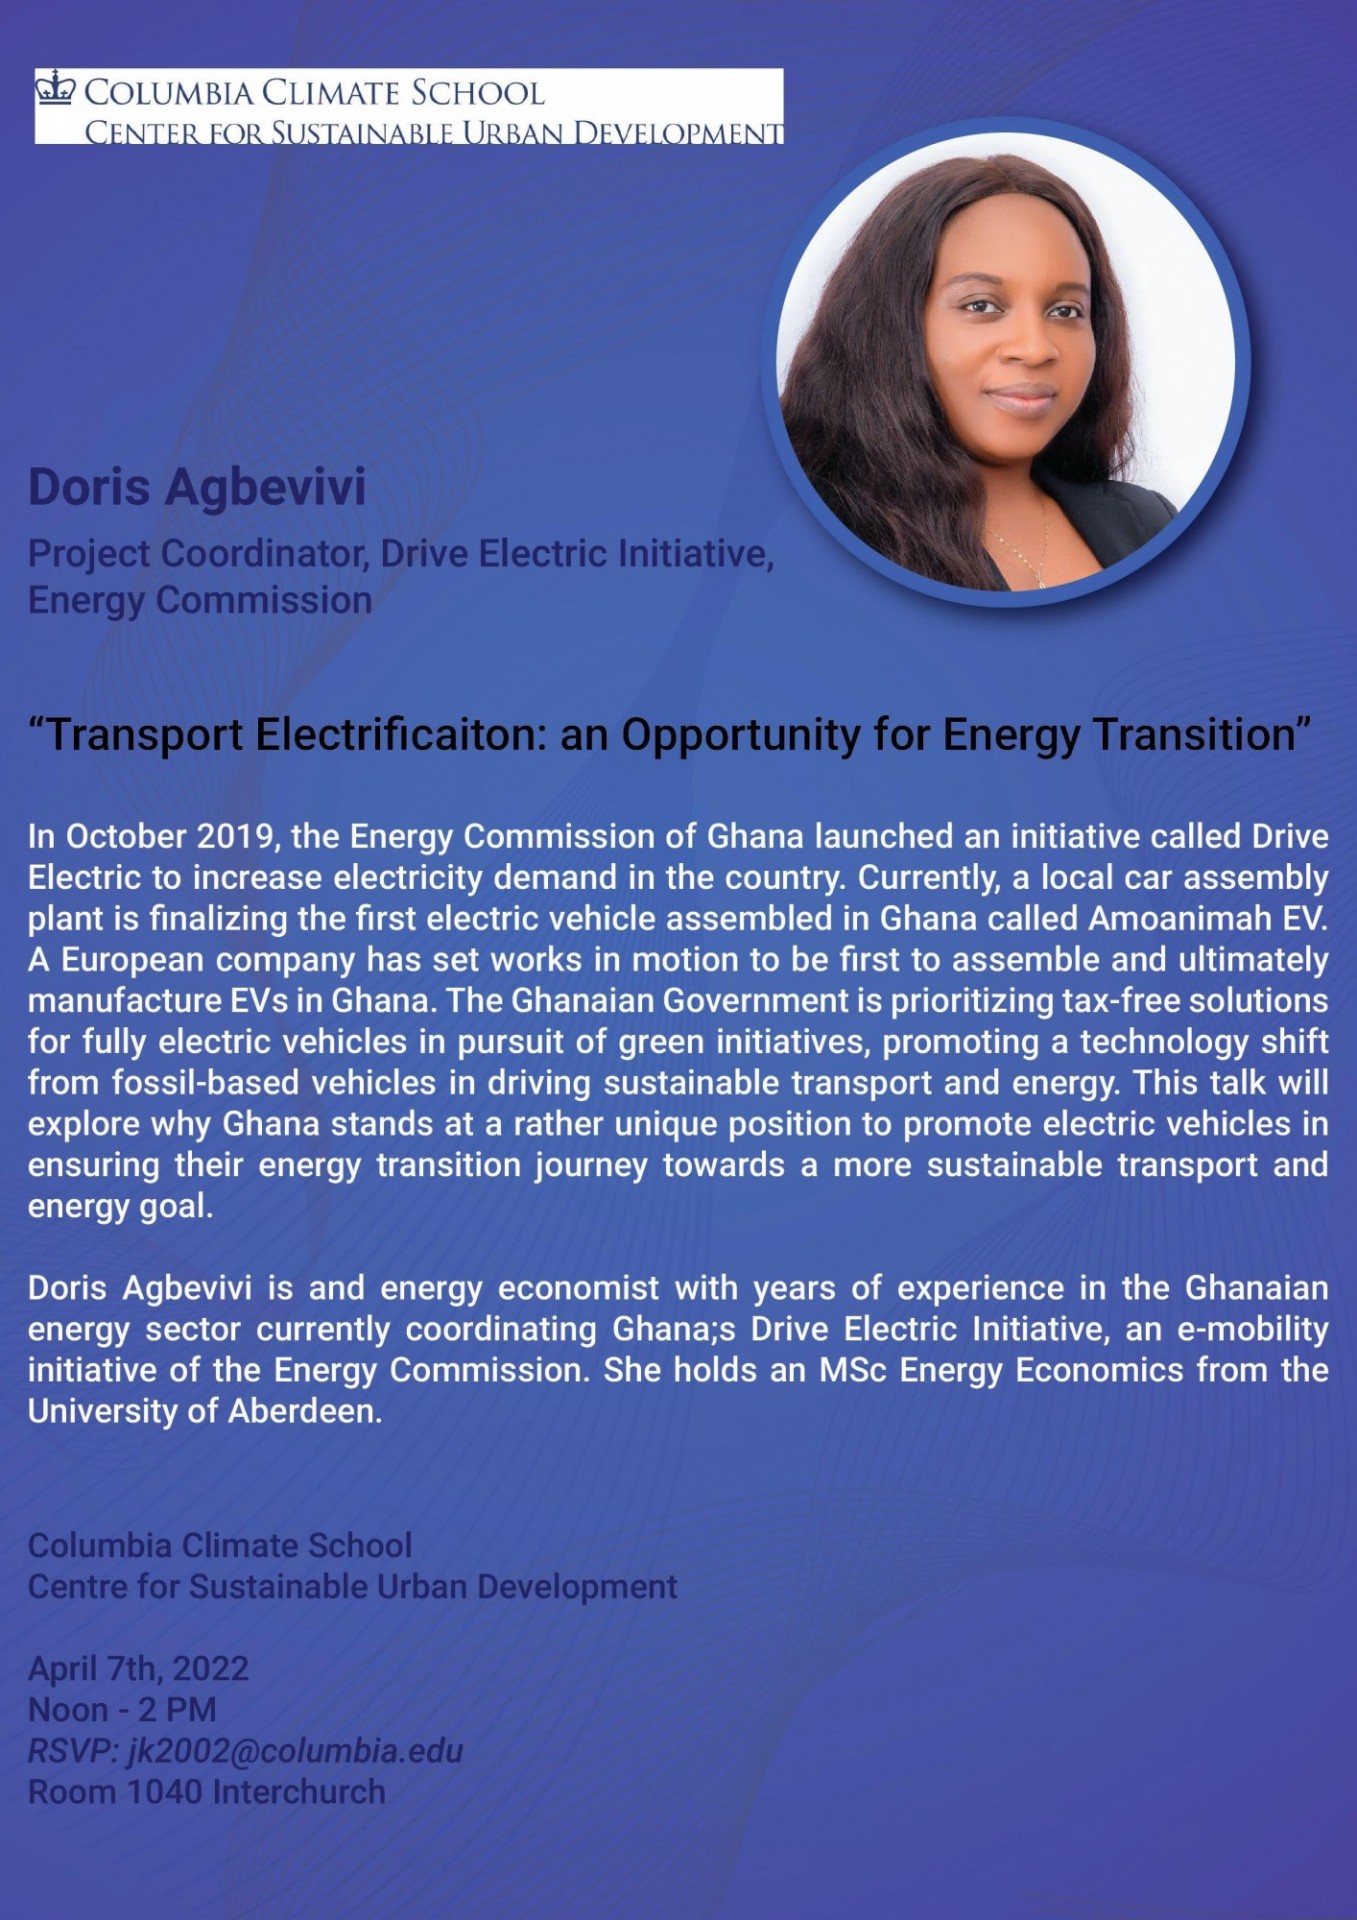 Doris Agbevivi from the Ghana Energy Commission will give a talk on Thursday April 6th 2022 at noon on "Transport Electrification: An Opportunity for Energy Transition" Room 1040 InterChurch Building 475 Riverside Dr